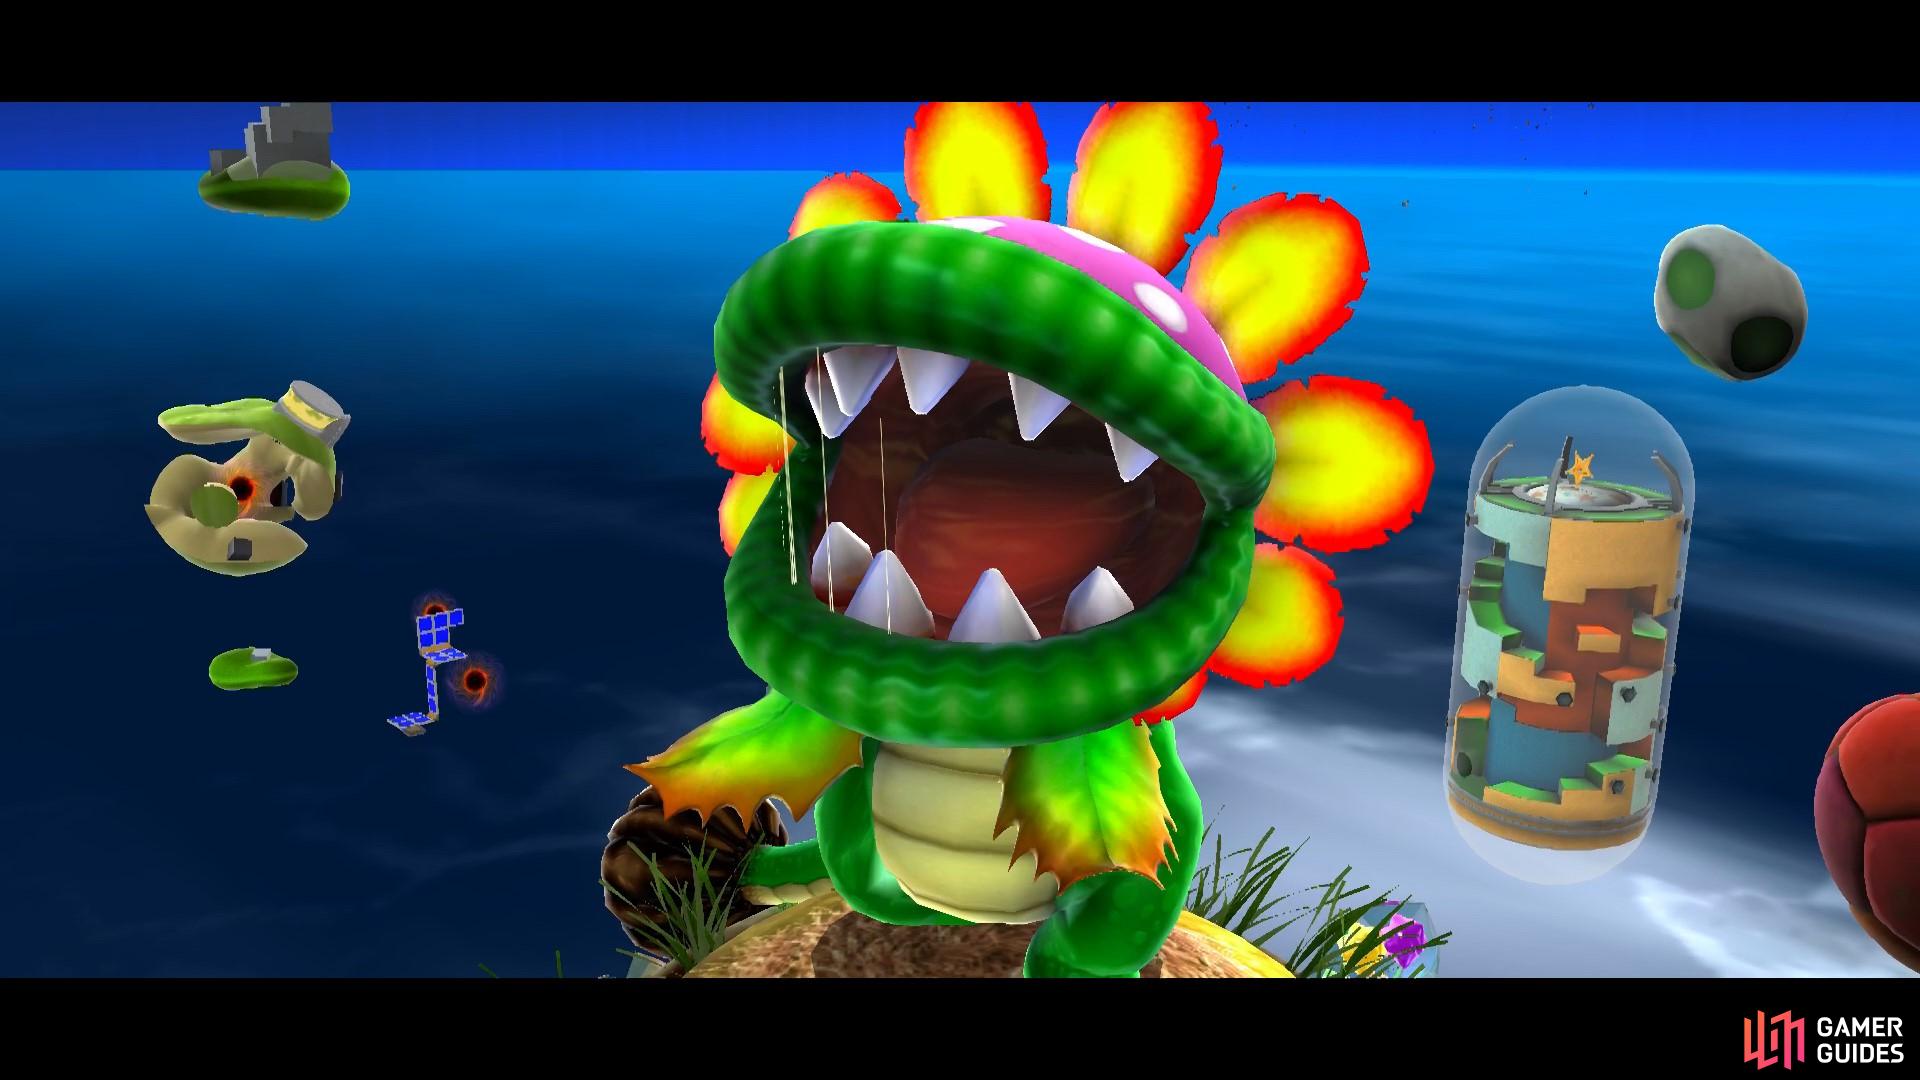 The Dino Piranha is the boss you’ll need to defeat to get the Power Star.